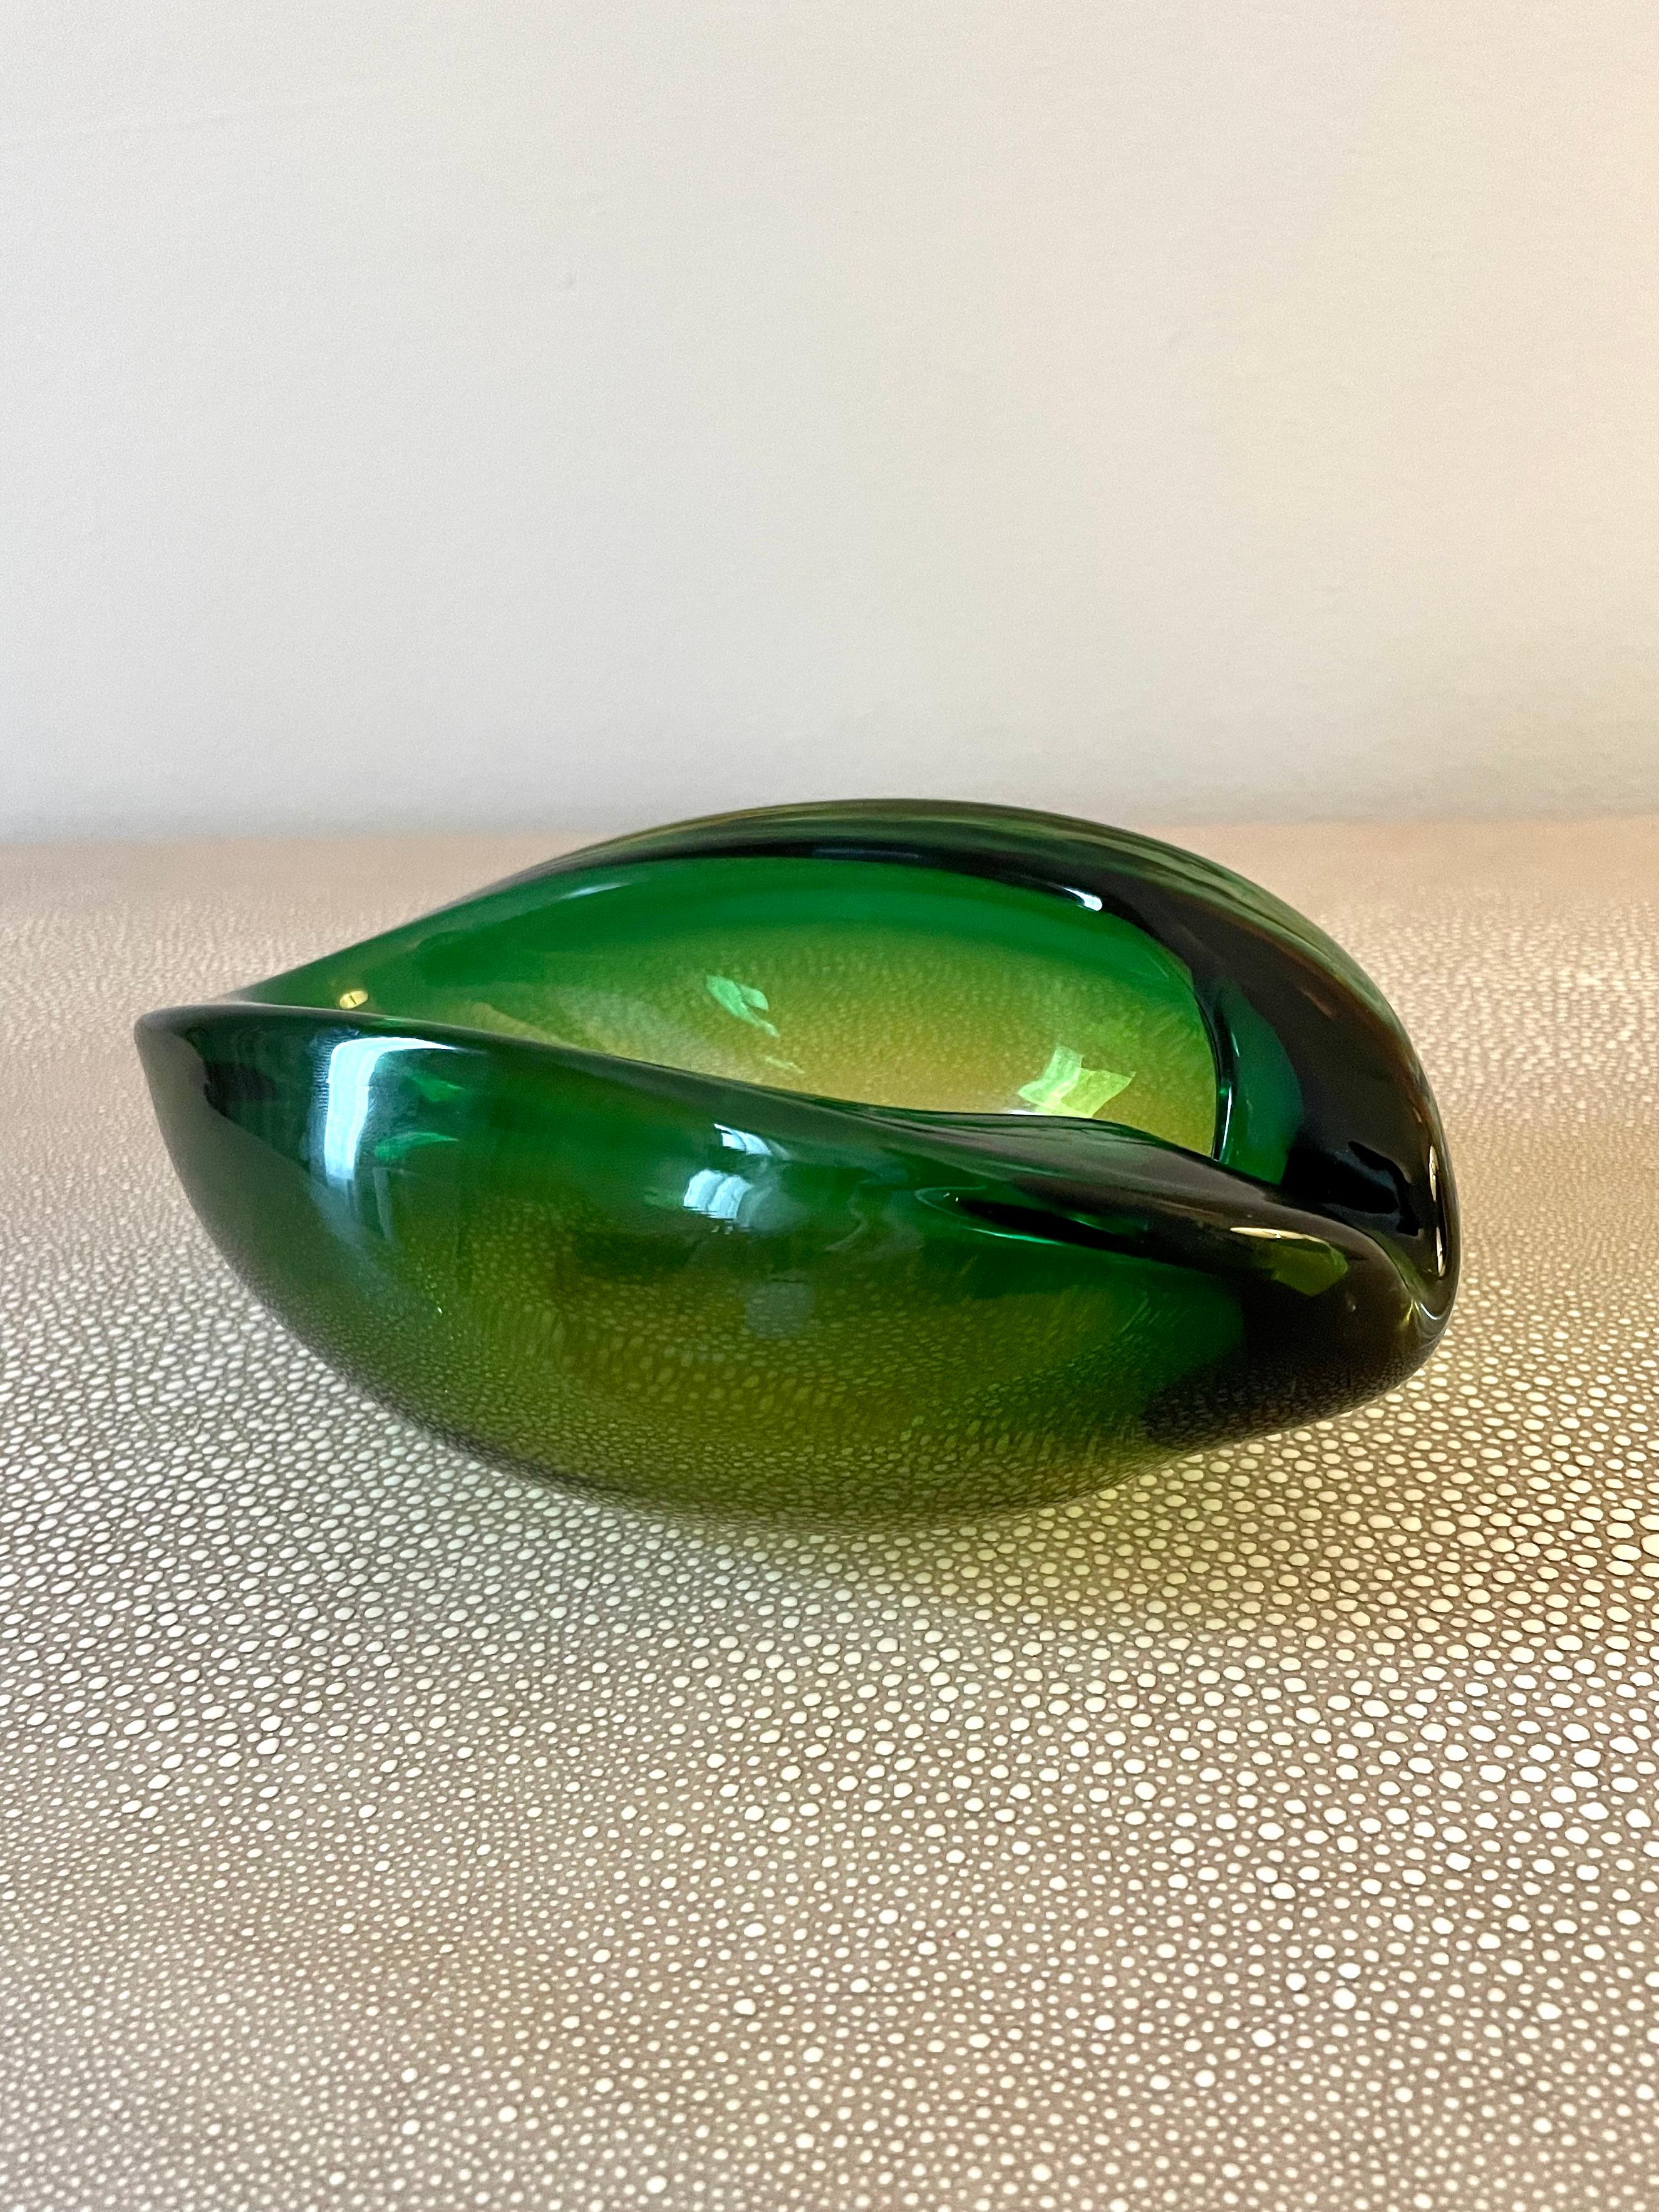 A Wonderful Sommerso Murano glass bowl or ashtray - a large size, perfect for a cigar and smoking room or bar. Also great for 420 or just as nut / candy dish / bowl or a decorative piece. Represents the mid century very well and is in very good